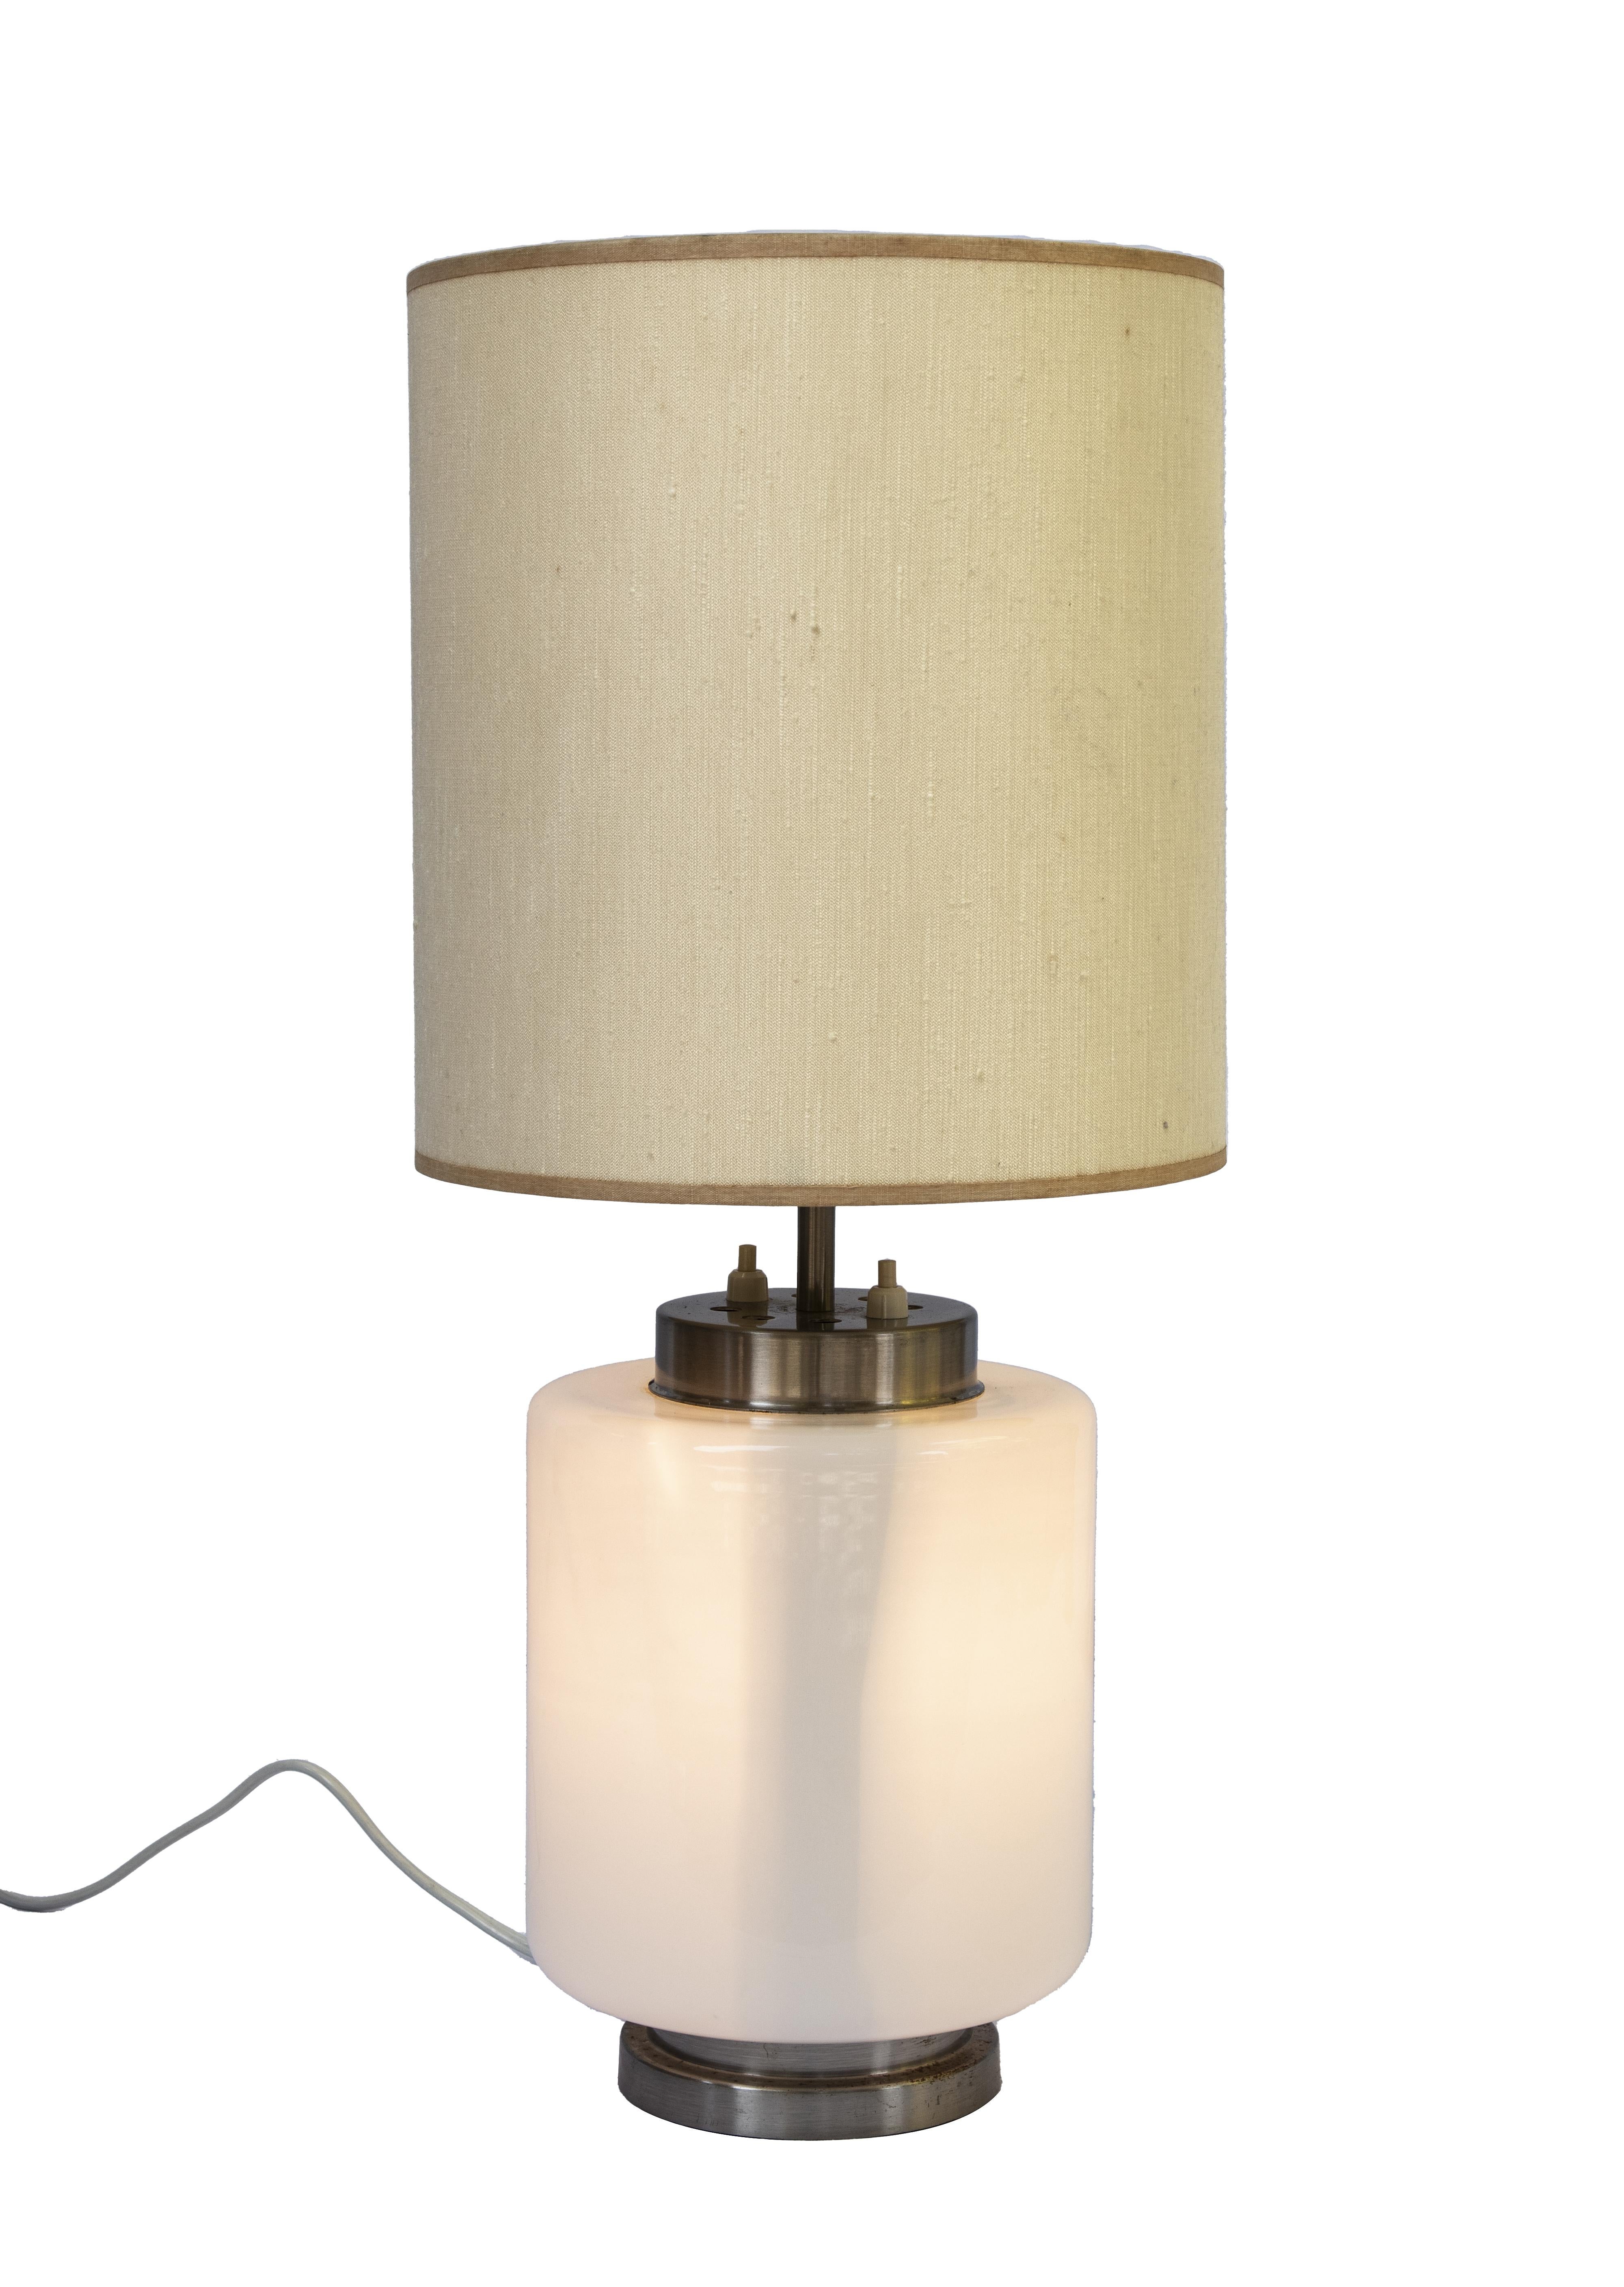 Vintage Table Lamp by Stilnovo, Italy 1960s.

h58×25×25 cm. 

Brass structure, opal glass base containing a light and fabric diffuser.

Very Good conditions.